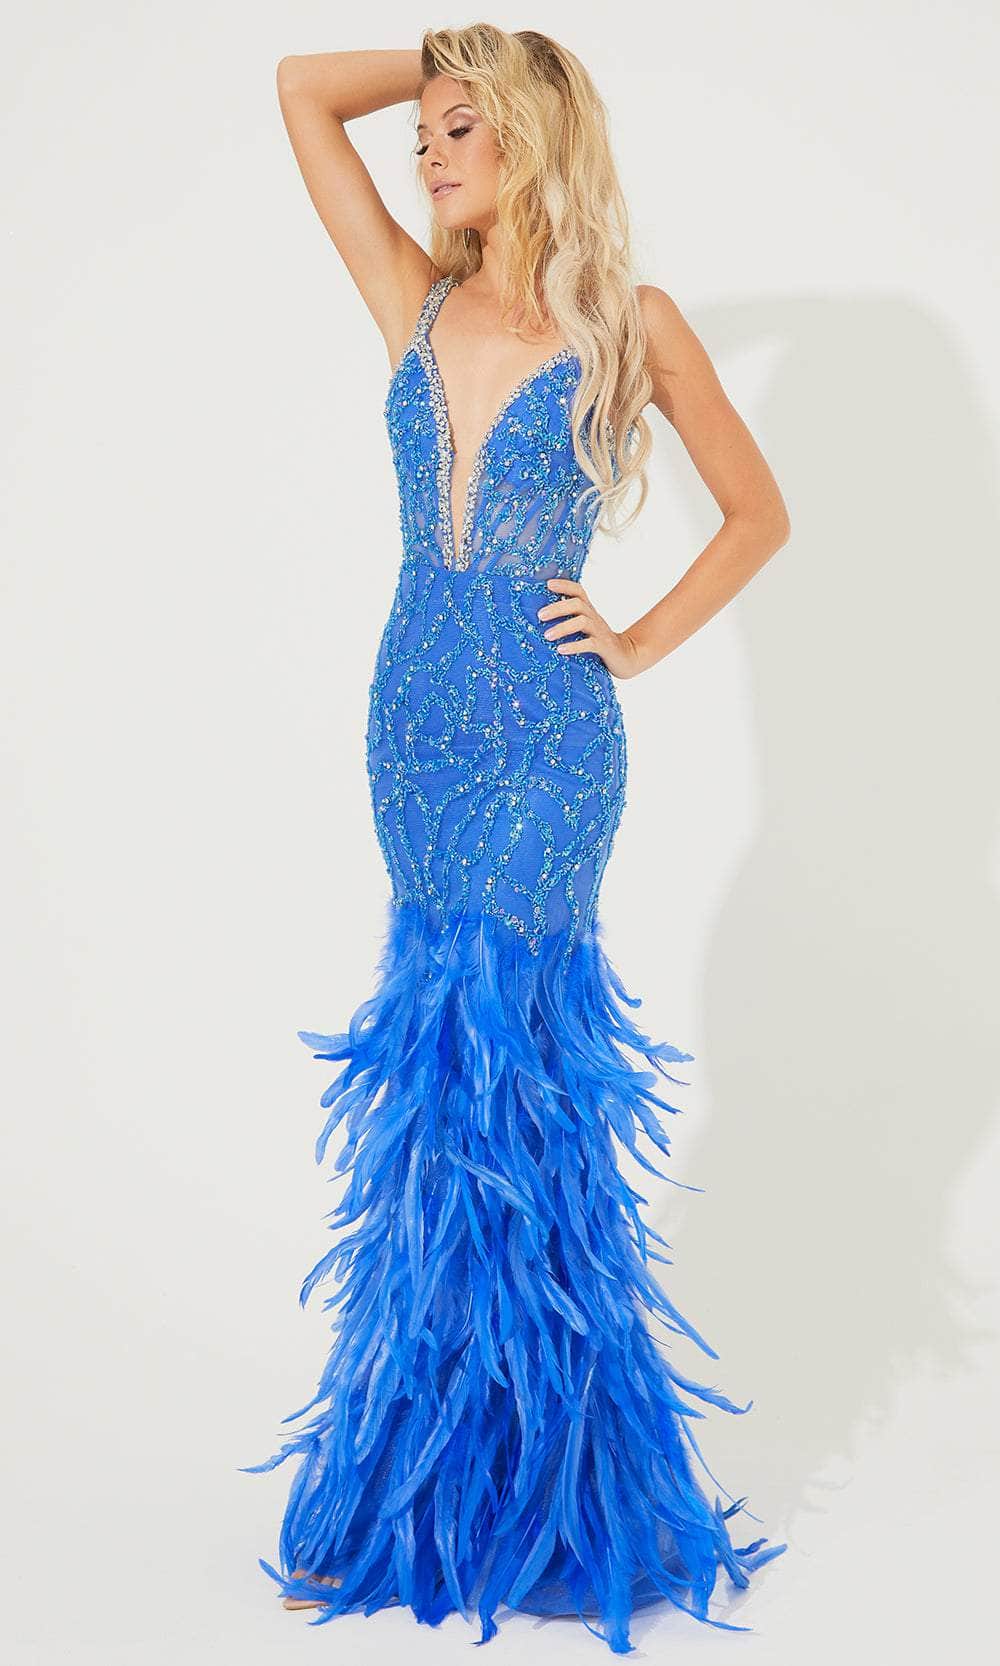 Image of Jasz Couture 7514 - Feather Sheath Prom Dress